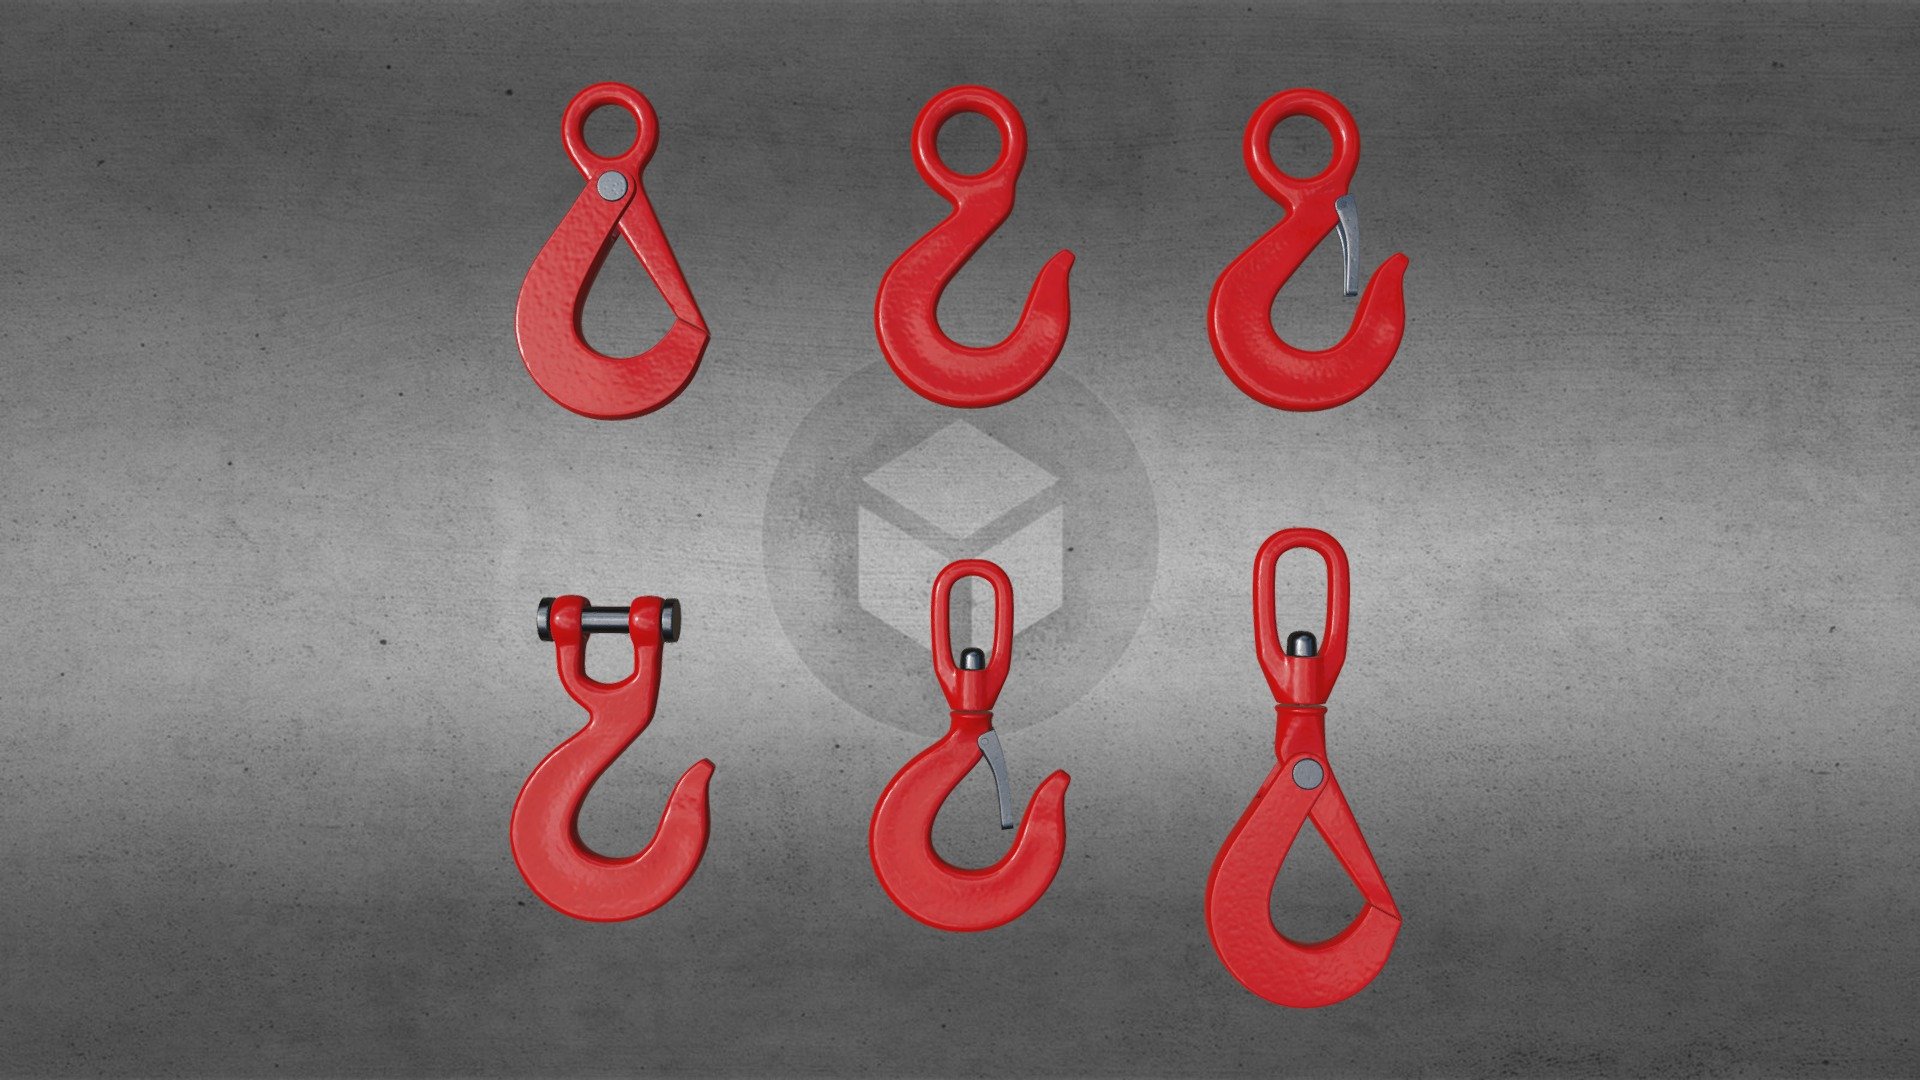 3D set of New Red lifting crane hooks low-poly 3d model ready for Virtual Reality (VR), Augmented Reality (AR), games and other real-time apps.

3D Model Set of New Red lifting crane hooks. Industrial and building theme.

Tip: If desired, the number of polygons can be reduced

Zip contains:

1 .max (3dsMax 2016)

1 .mat (Vray Materials)

1 .blend (low poly with Subsurf.mod, with UV and Materials)

1 .fbx (high poly, smoothed)

1 .fbx (low poly, not smoothed)

1 .obj (high poly, smoothed)

1 .obj (low poly, not smoothed)

1 .spp (Substance Painter)

High resolution textures(4096x4096 (.PNG)): Base Color, Ambient Occlusion, Height map, Normal map, Metallic, Roughness

Vray Textures Pack(.PNG)

PBR Textures Pack(.PNG)

The author hopes to your creativity.

If you have questions or suggestions, please contact me

P.S. This model was created in software &lsquo;Blender 3D' with GNU General Public License (GPL, or free software) - 3D set of New Red lifting crane hooks - 3D model by Vitamin (@btrseller) 3d model